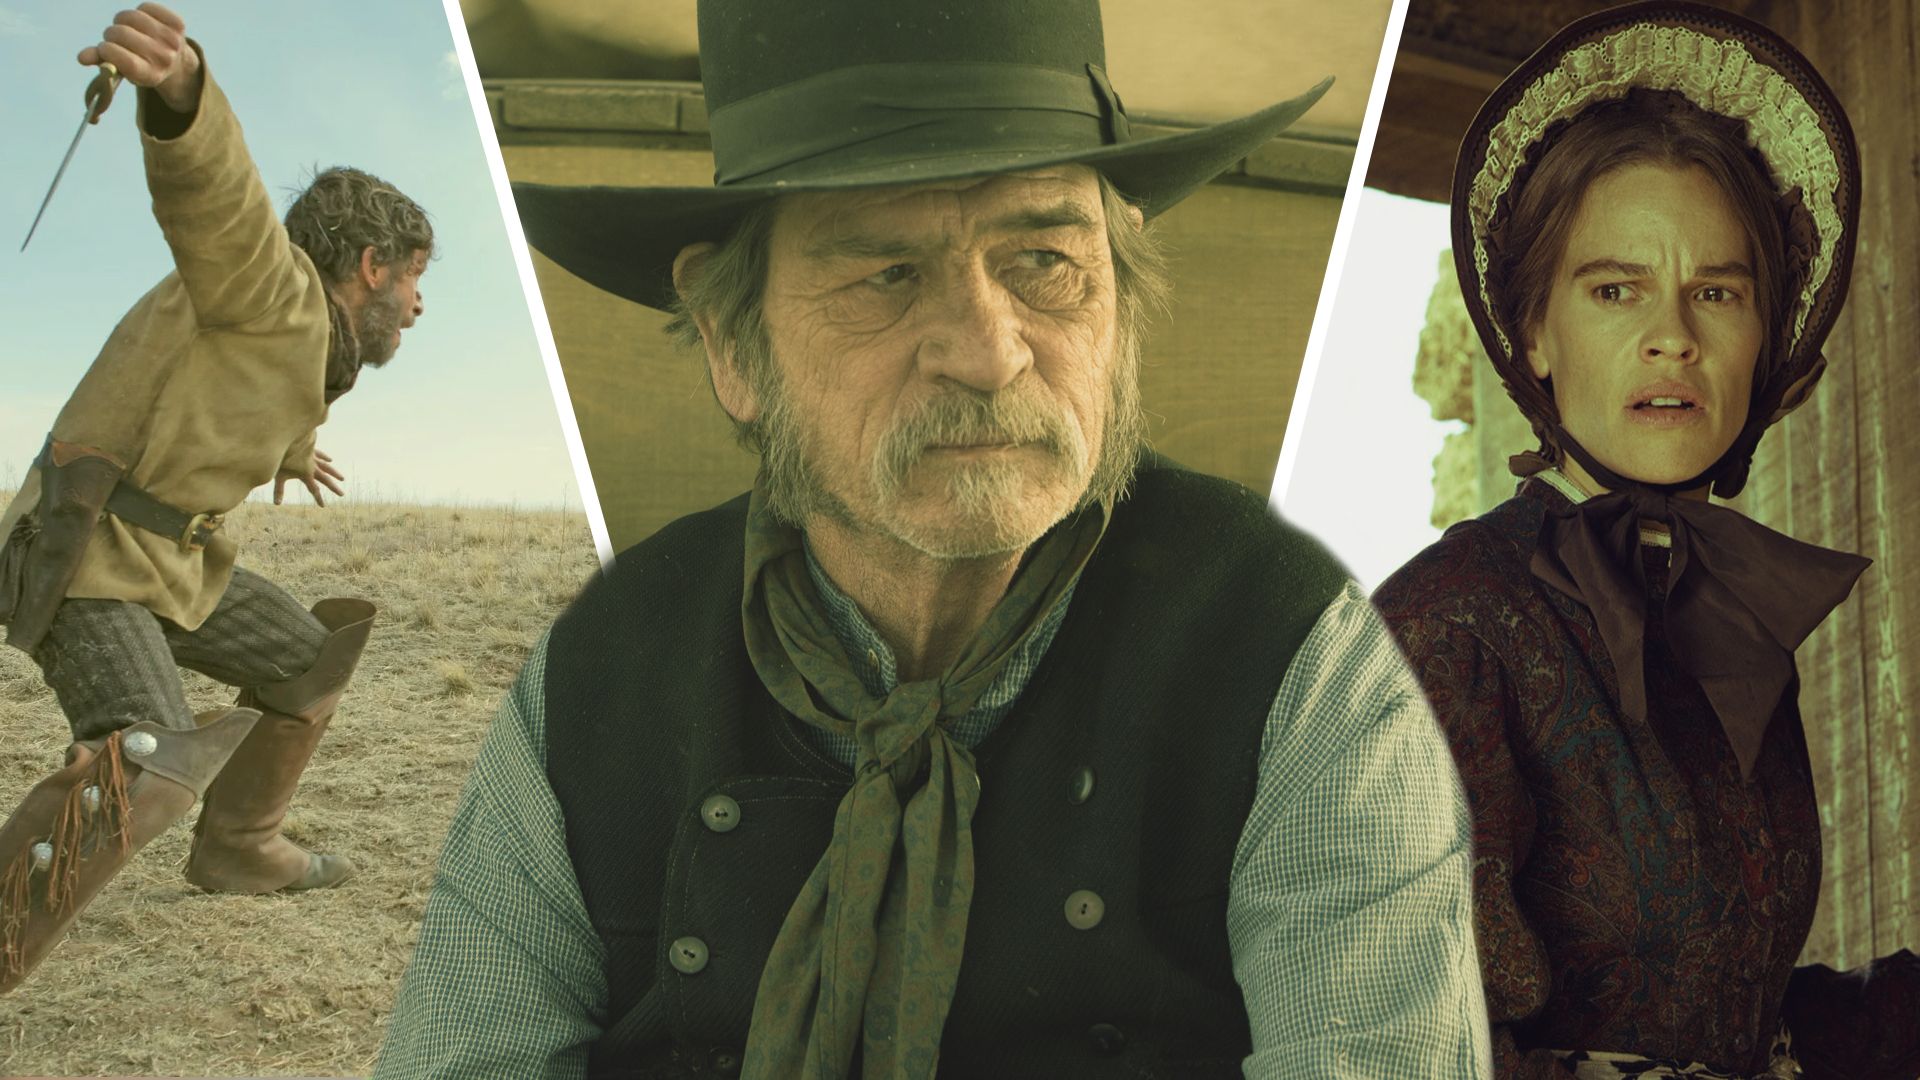 A custom image of Tommy Lee Jones and Hilary Swank in The Homesman